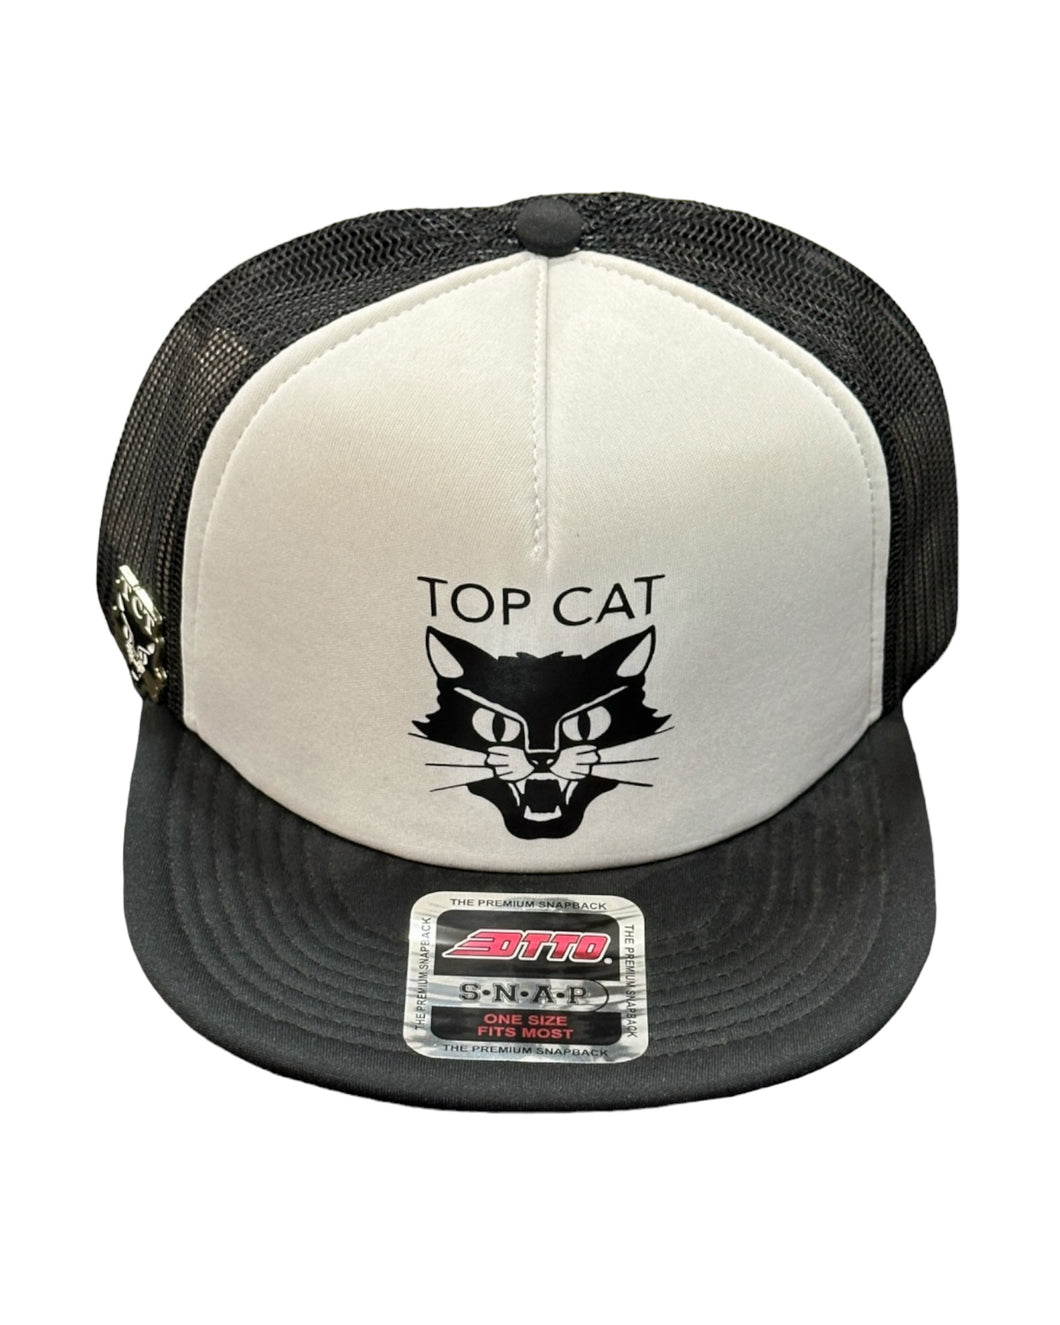 White and Black Snap Pact Tattoo Hat